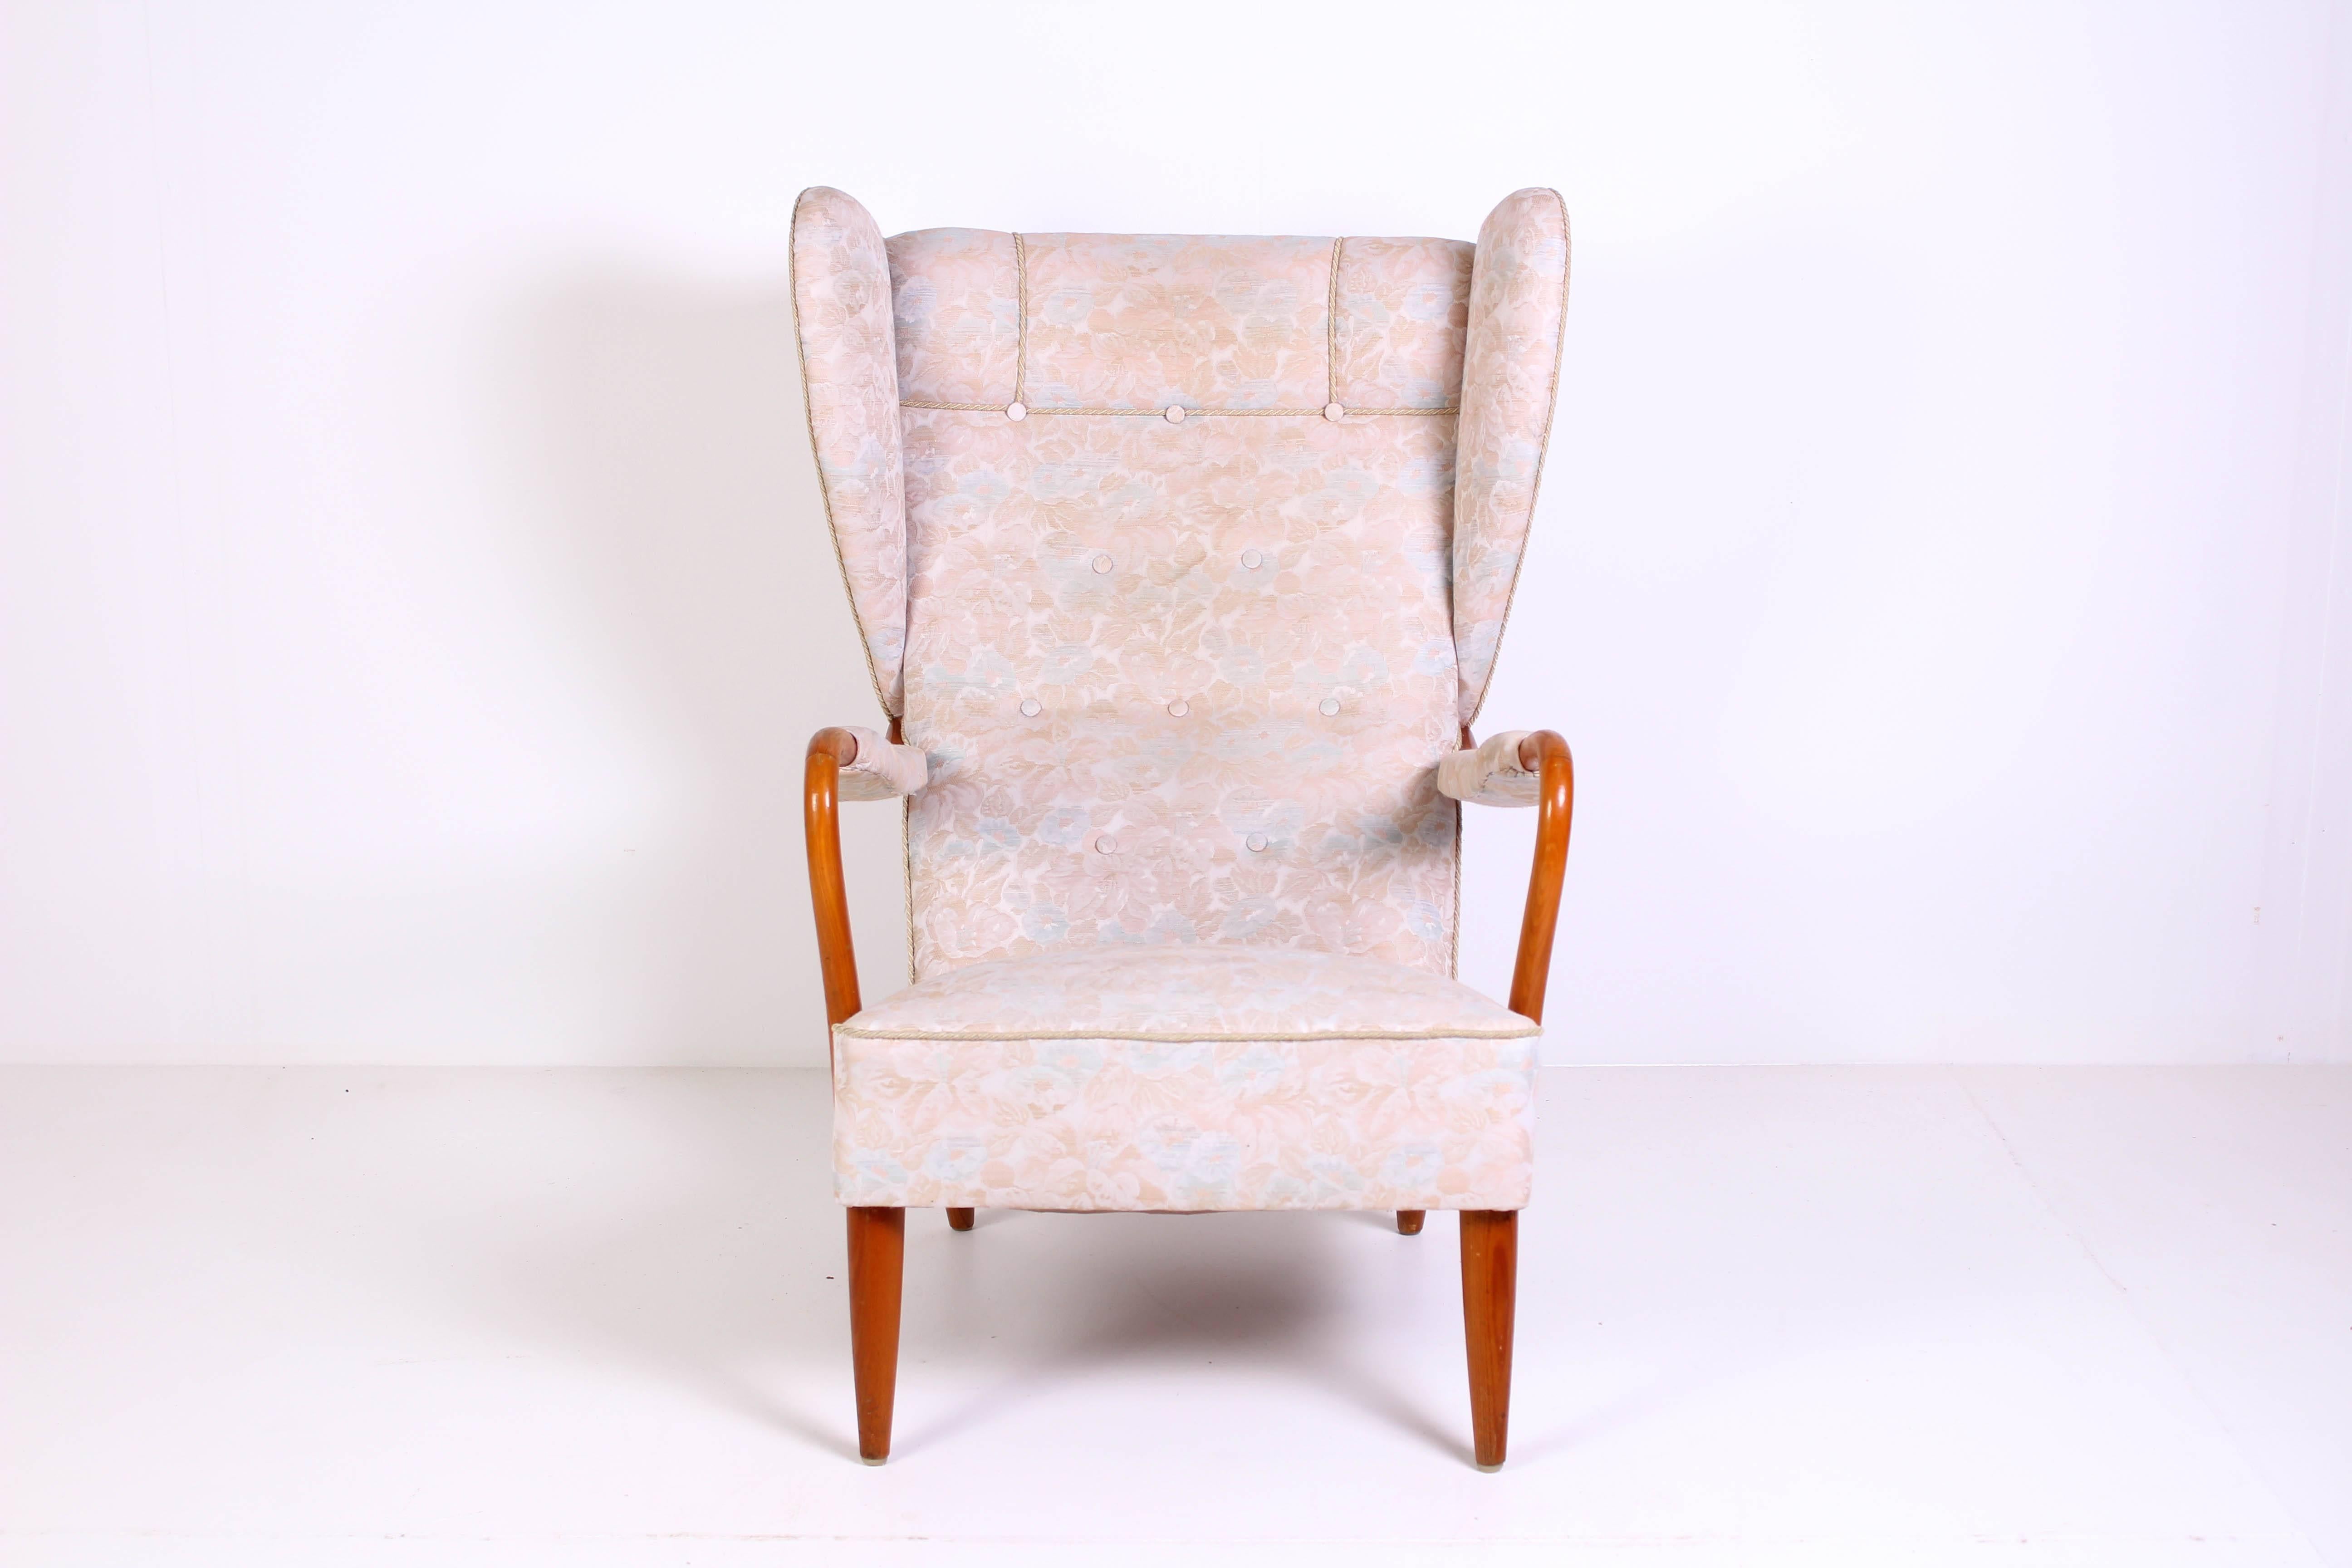 Rare 1940s Swedish wingback chair with nice sculptural shapes. This chair is just as beautiful as it is comfortable. Very good vintage condition with minor signs of usage on wood frame and upholstery in good condition.